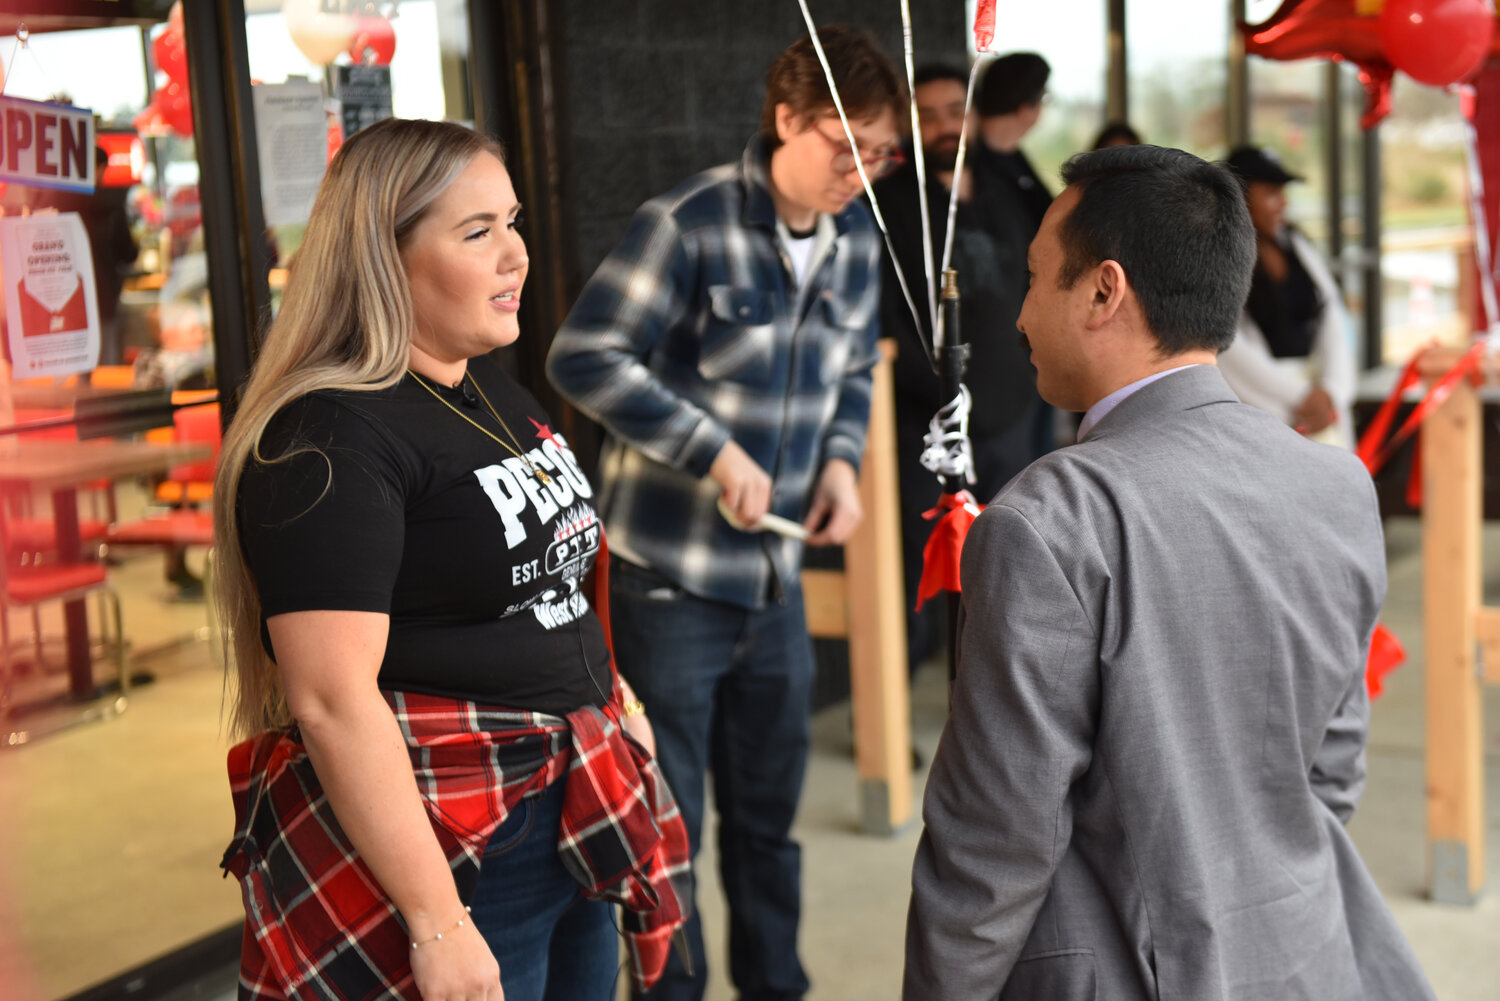 Yelm's mayor Joe DePinto, right, talks with Brie Noble, Pecos Pit Bar-B-Que's director of marketing and public relations, prior to the resturuant's grand opening on Friday, Jan. 26.